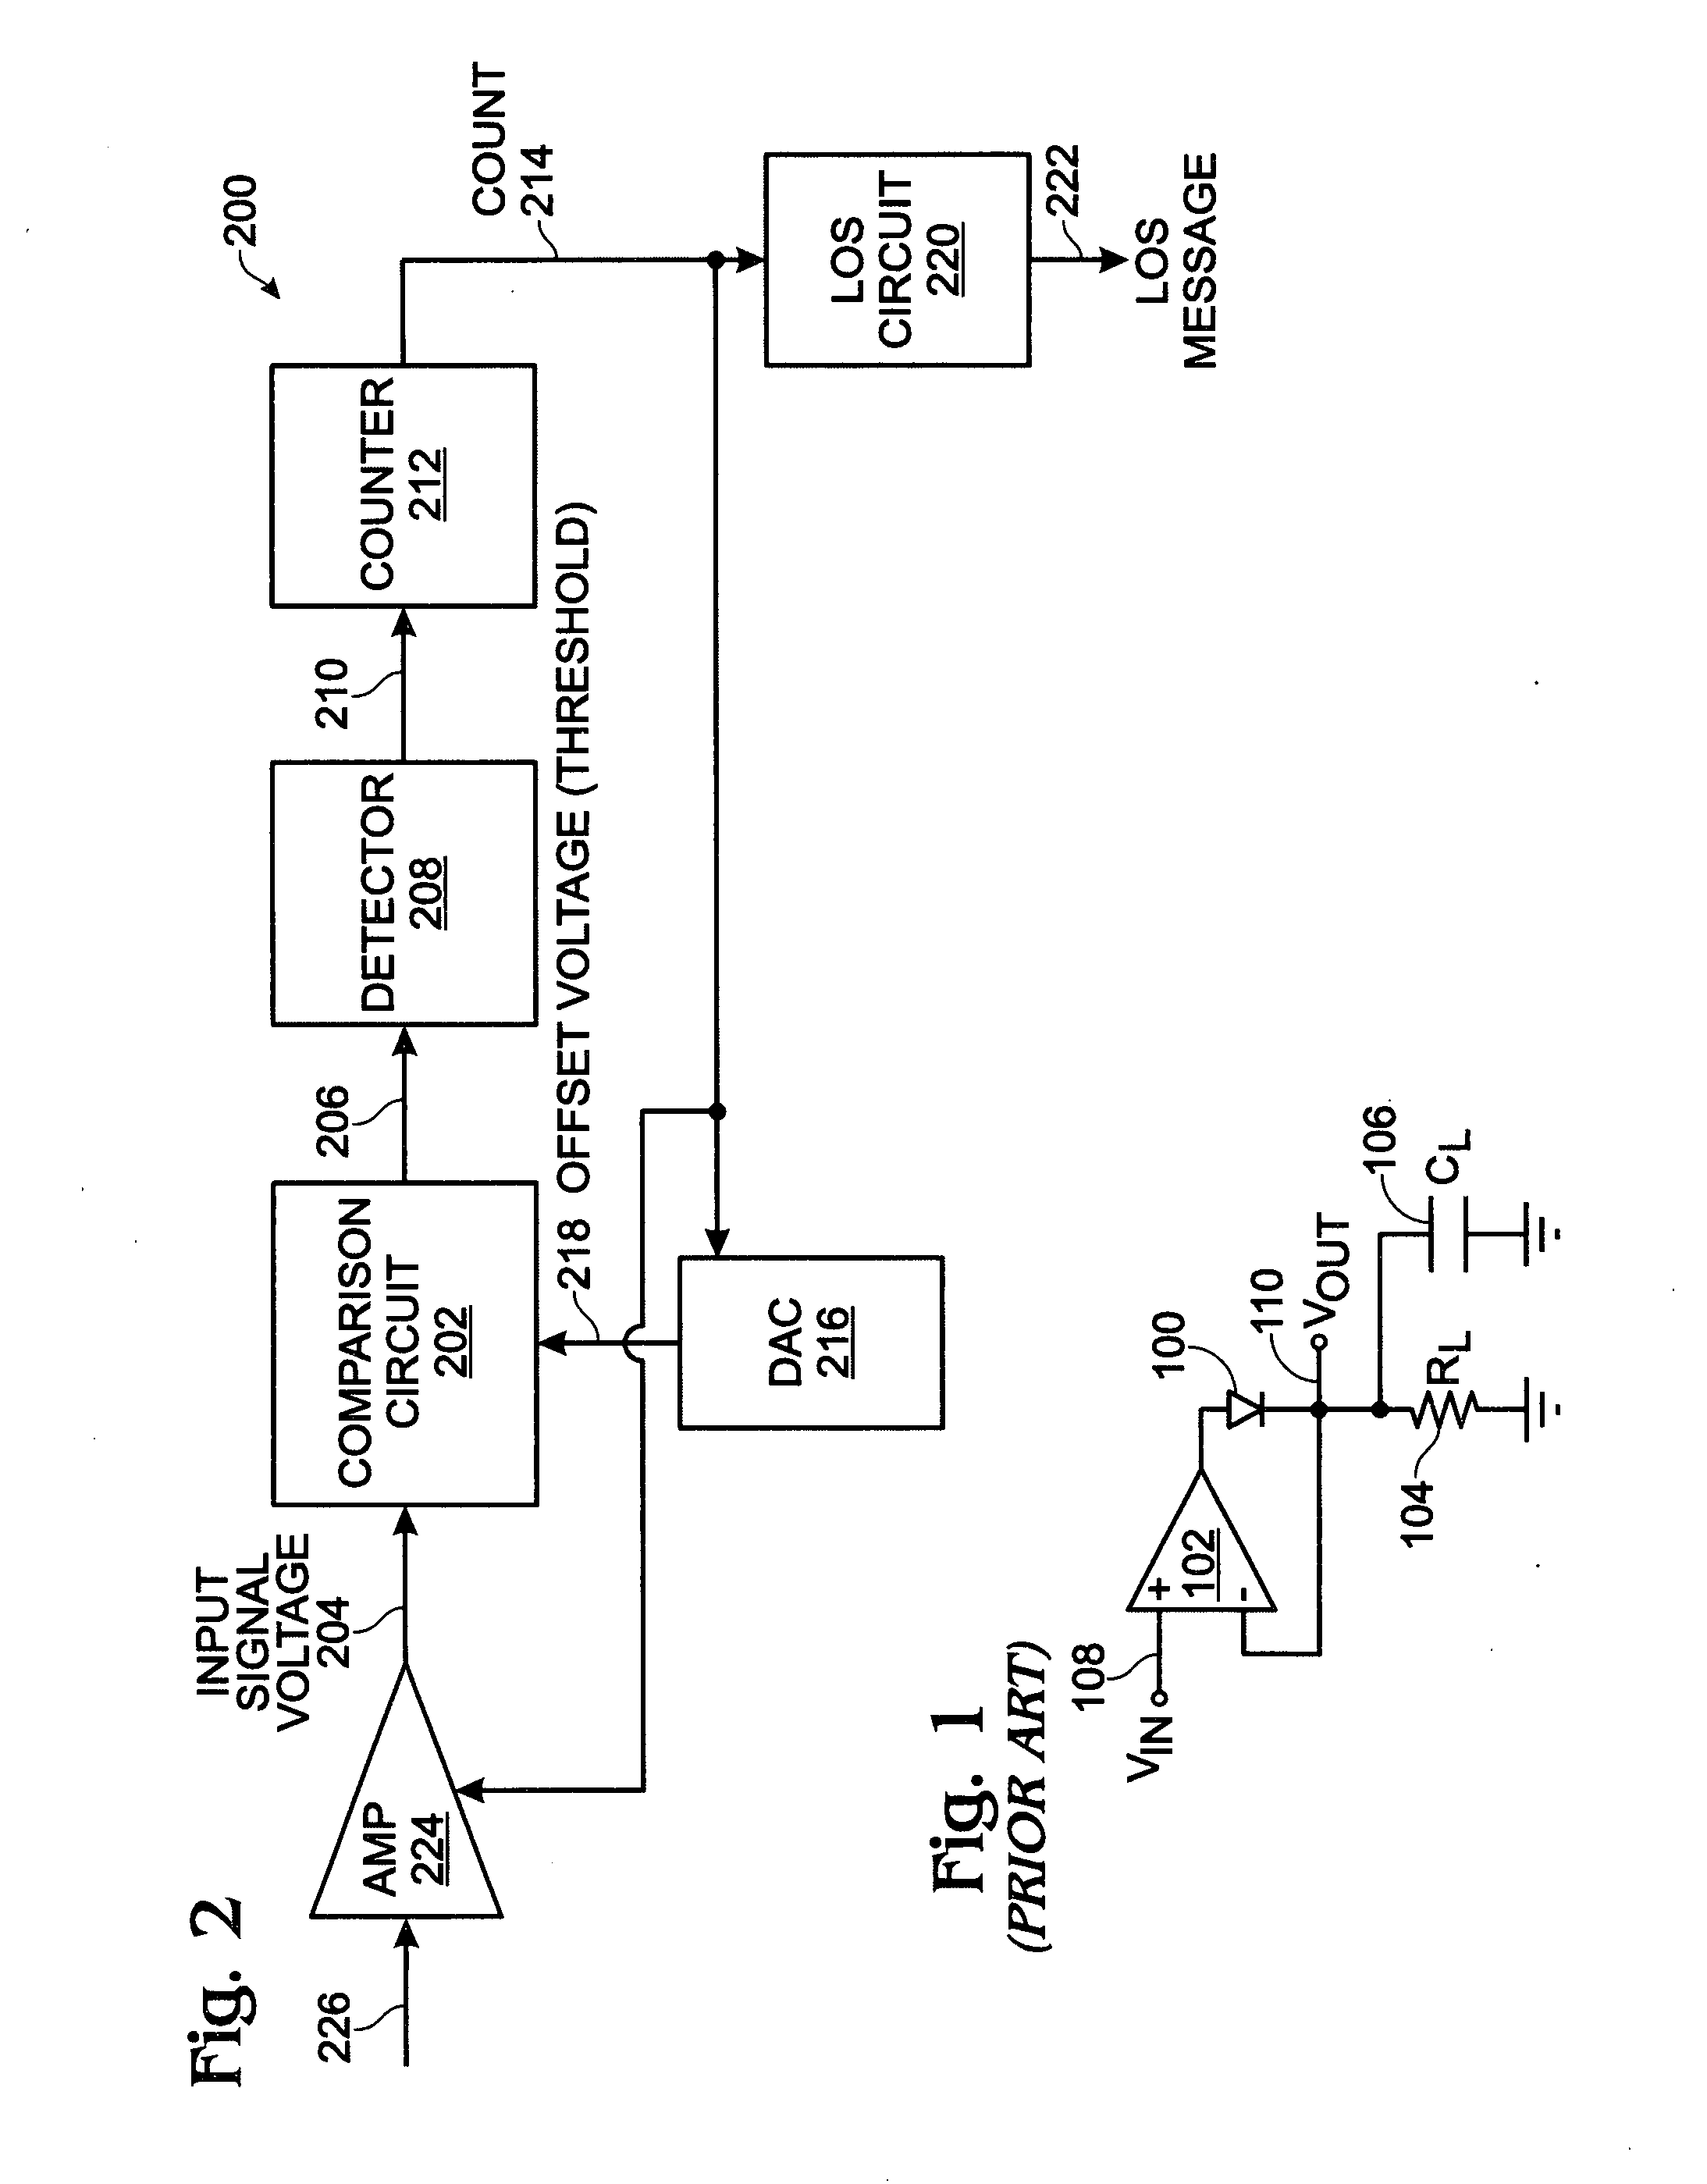 System and method for signal level detection